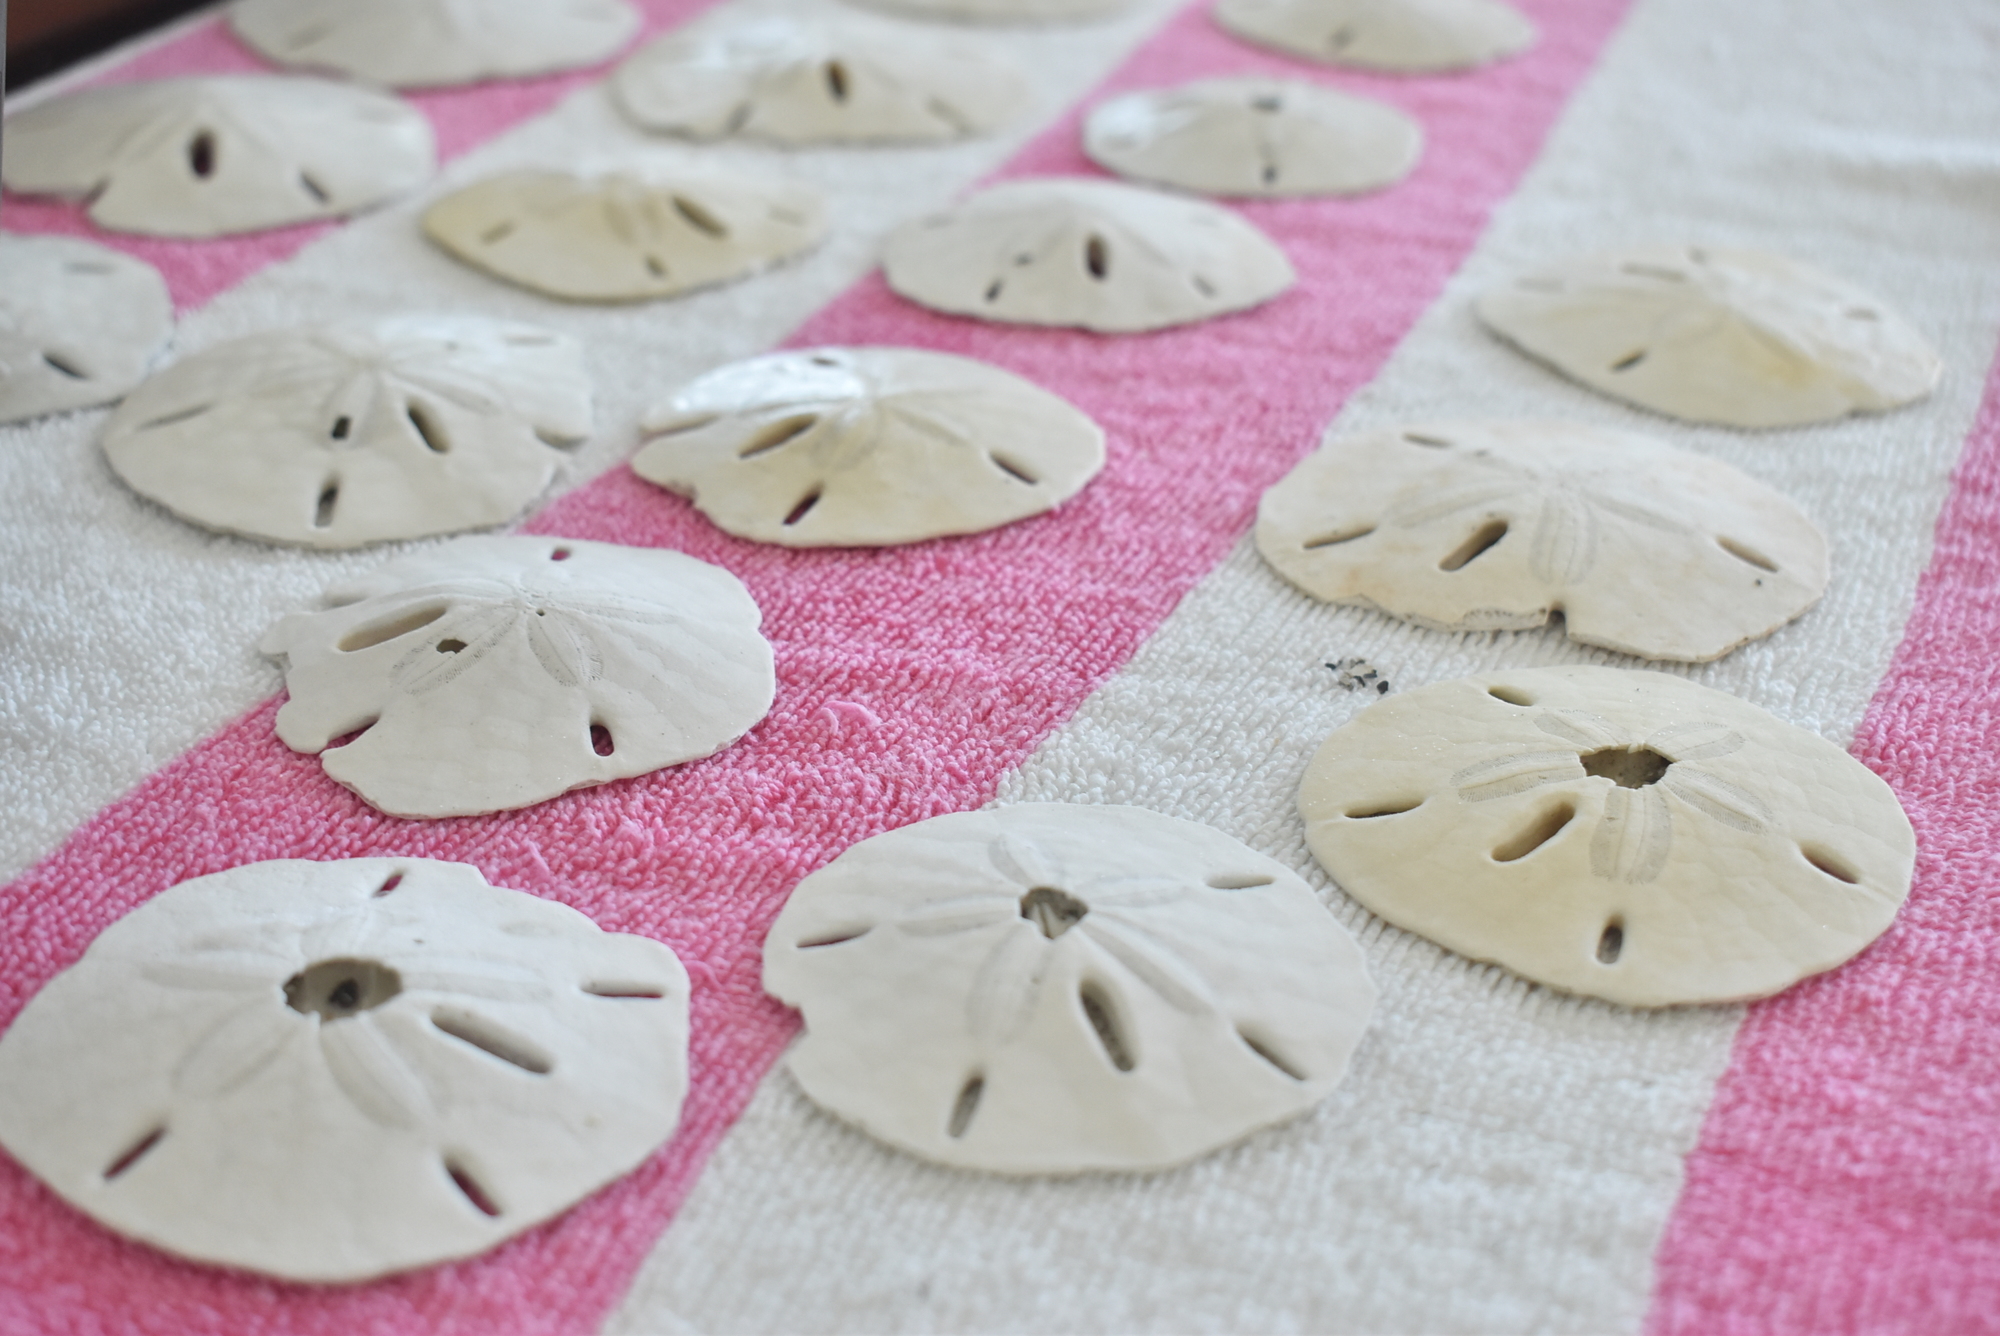 Drying sand dollars rest on a beach towel.